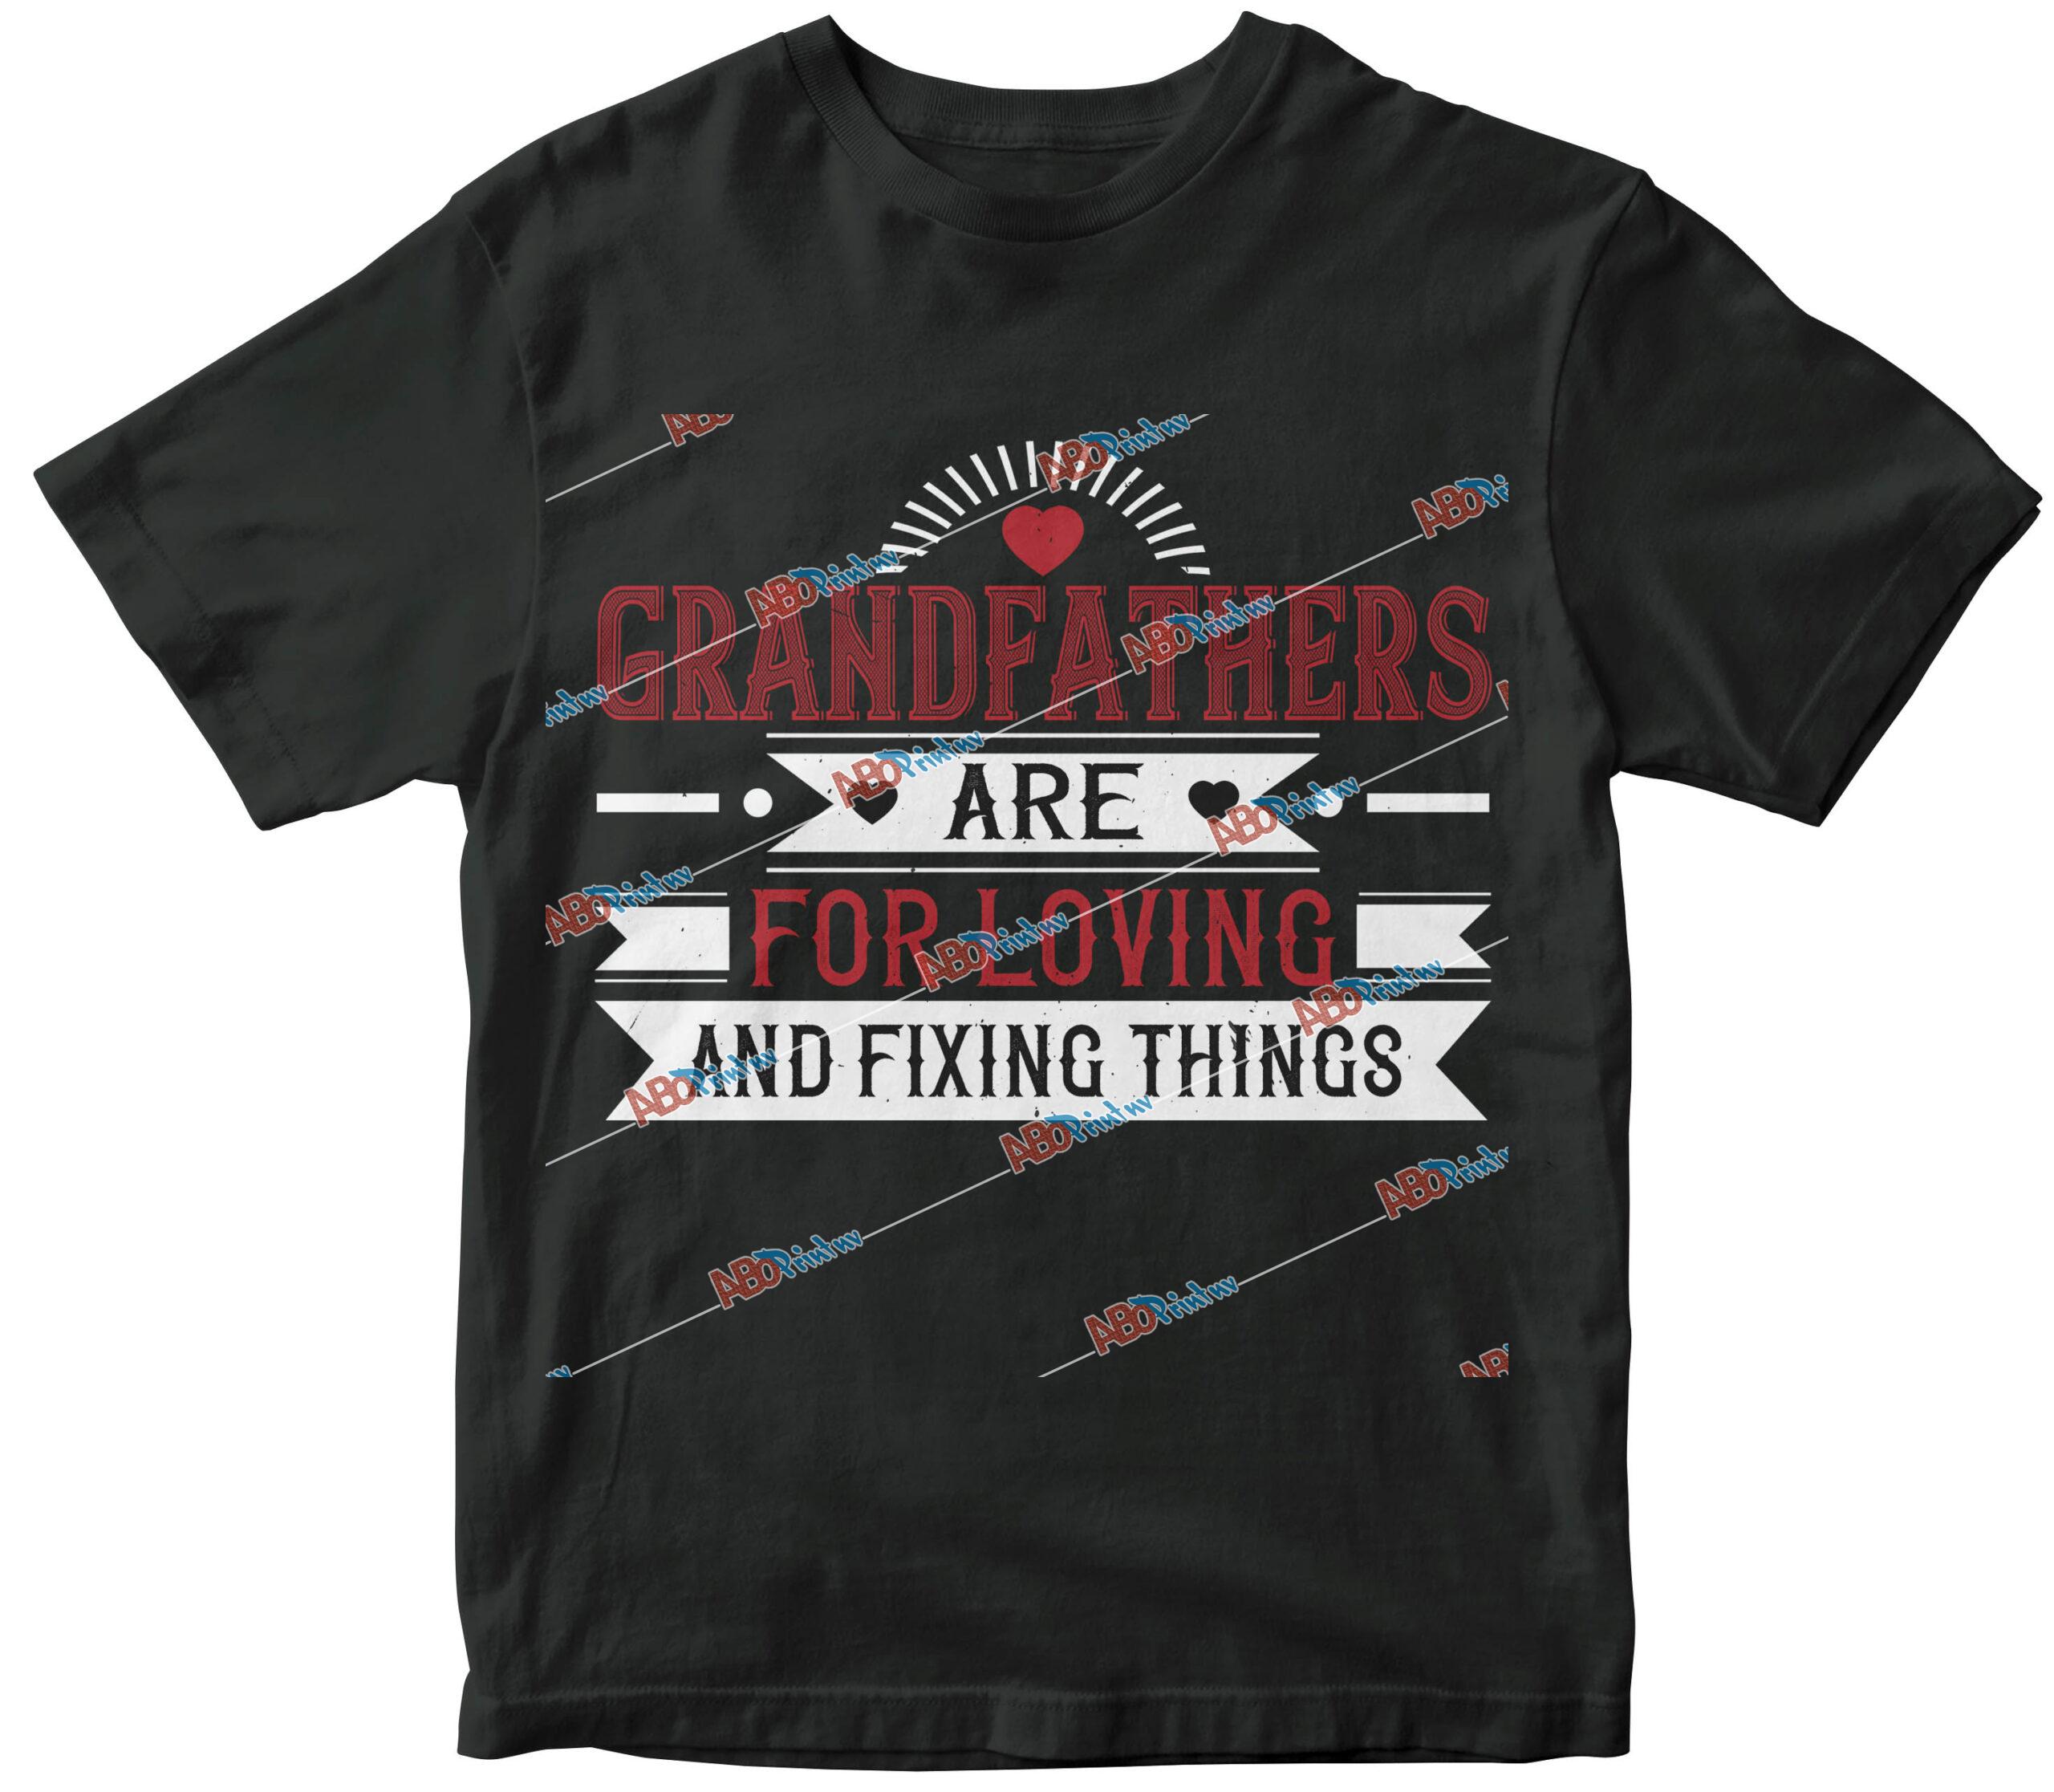 Grandfathers are for loving and fixing things-02.jpg